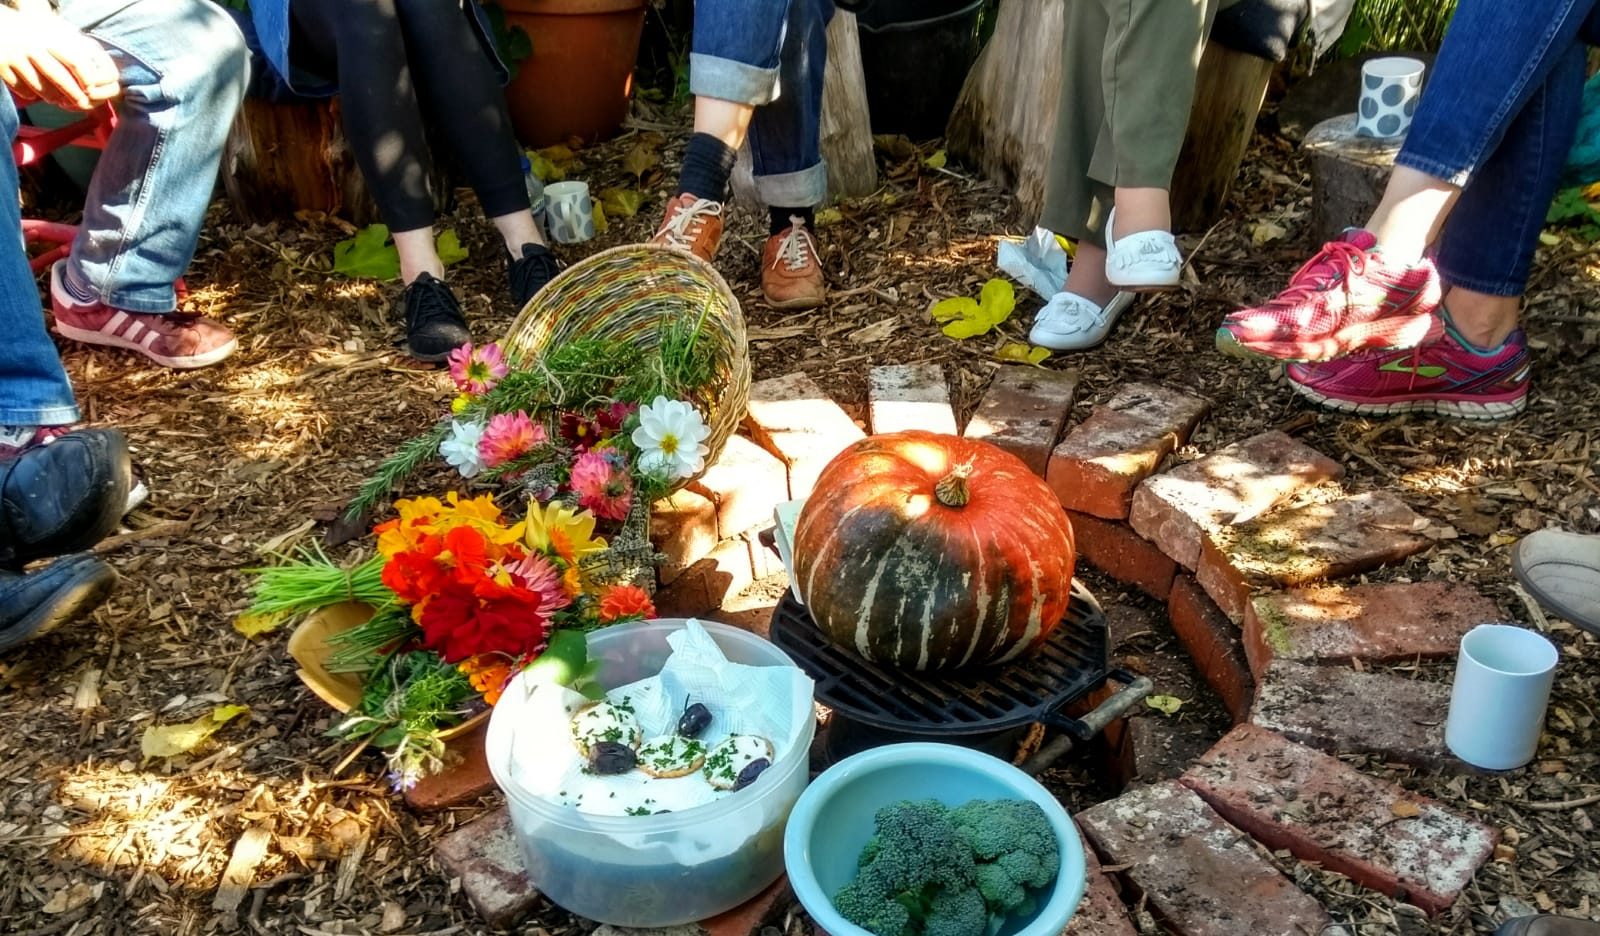 feet around a fire pit filled with harvest